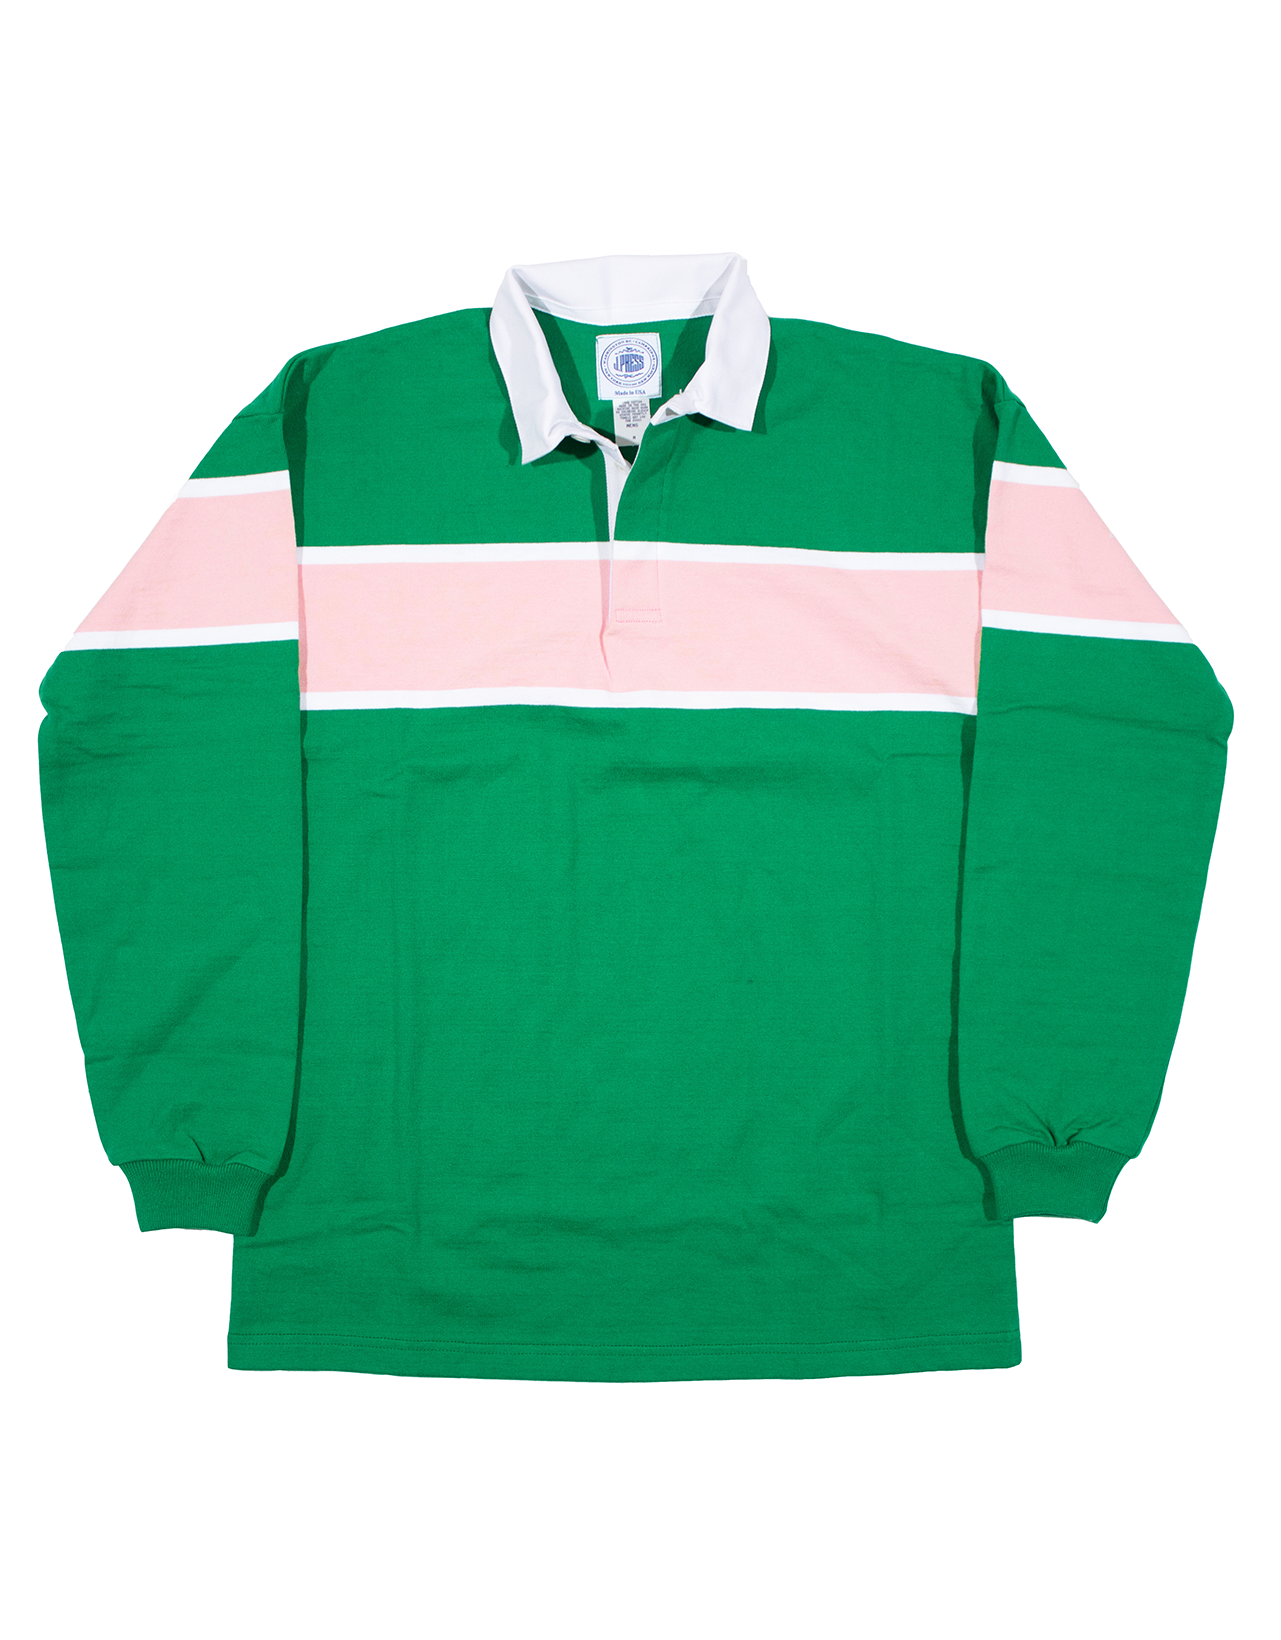 STRIPED RUGBY SHIRT - KELLY/WHITE/PINK